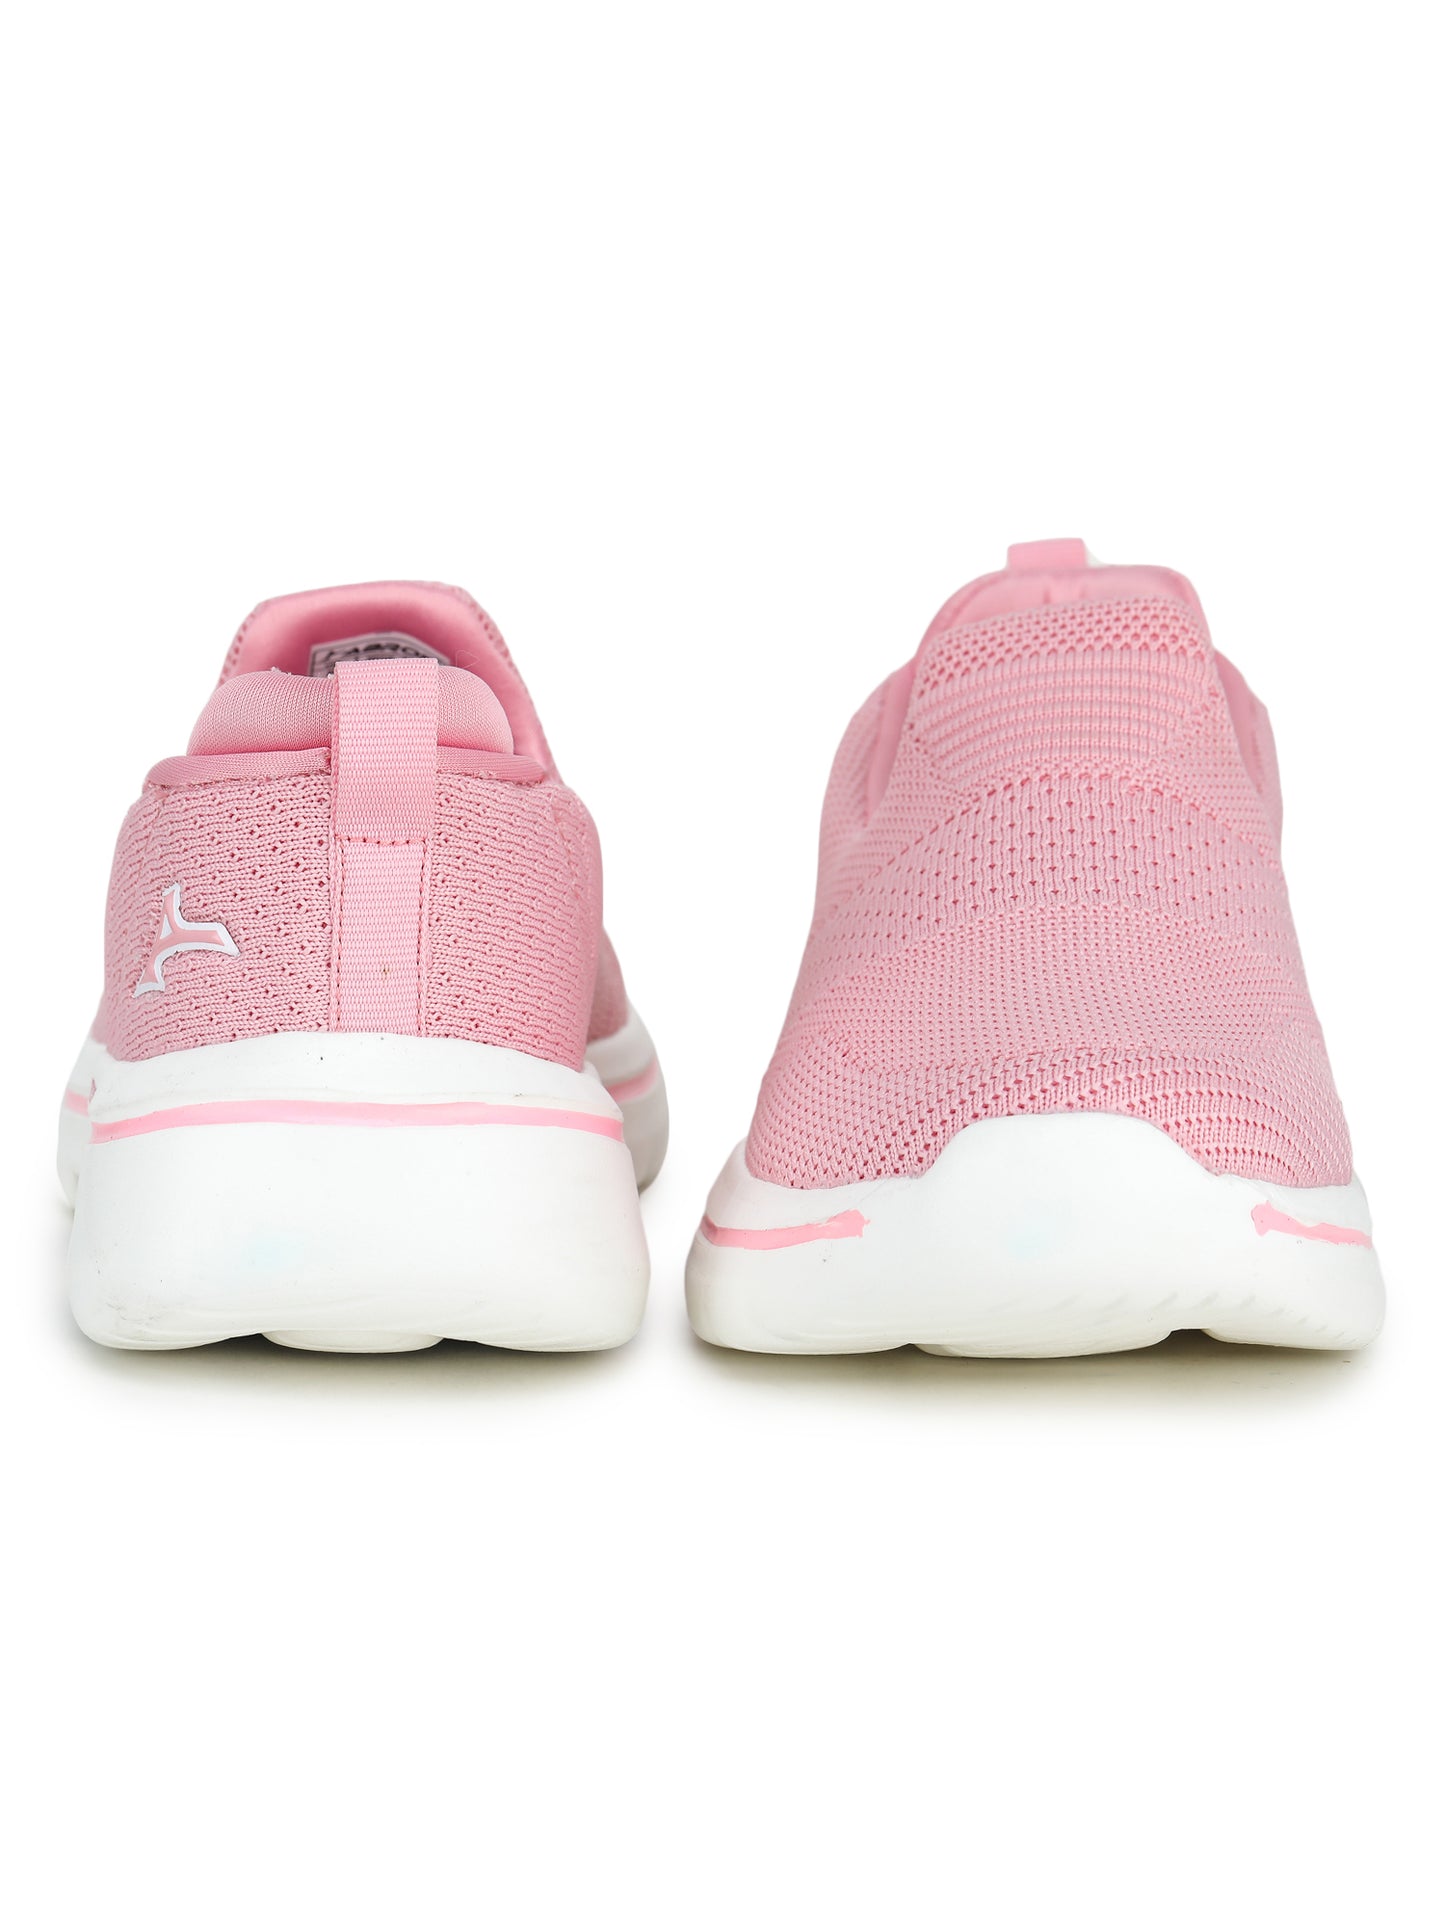 ABROS VICTORIA SPORTS SHOES FOR WOMEN